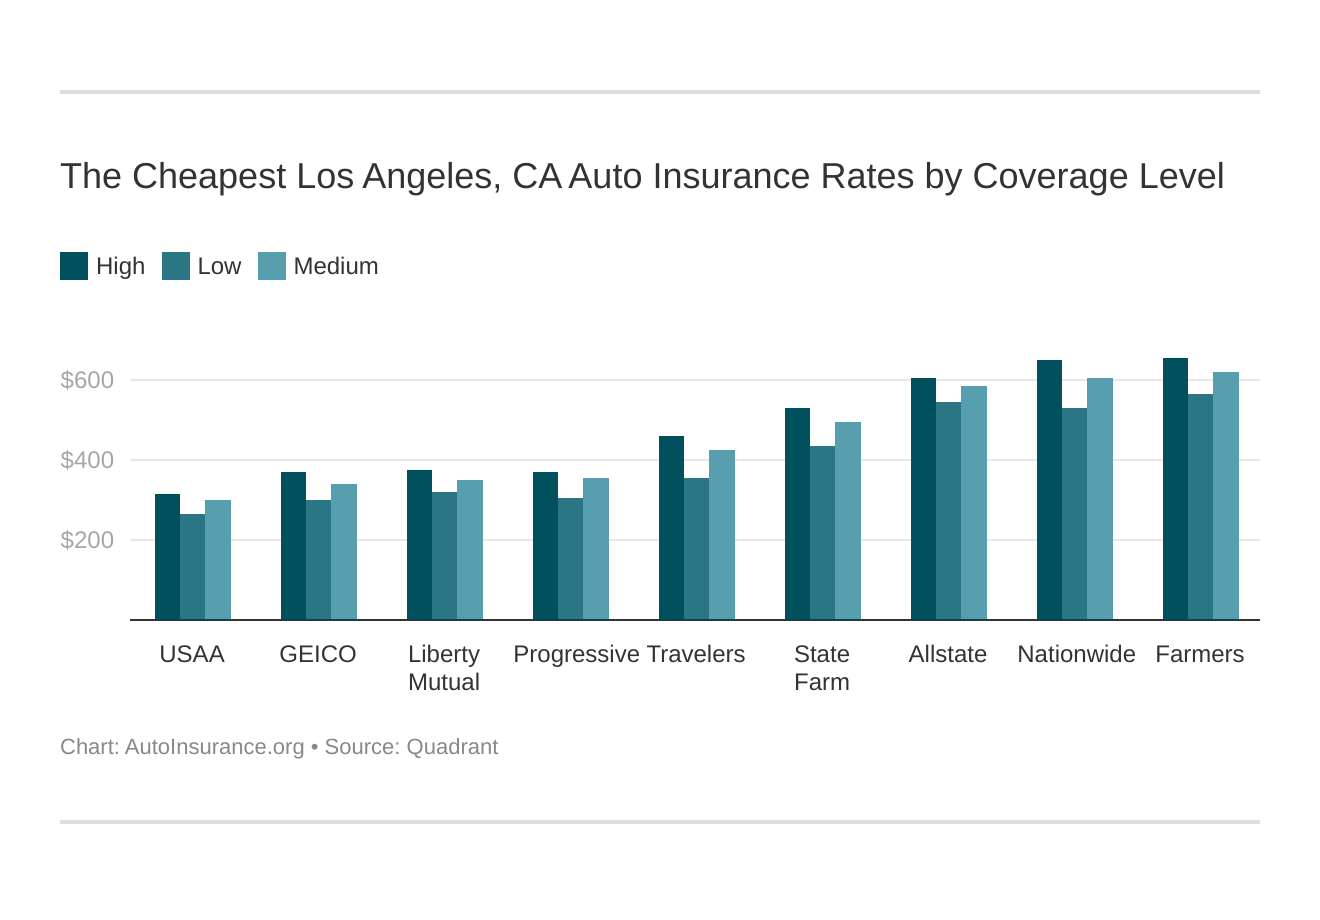 The Cheapest Los Angeles, CA Auto Insurance Rates by Coverage Level